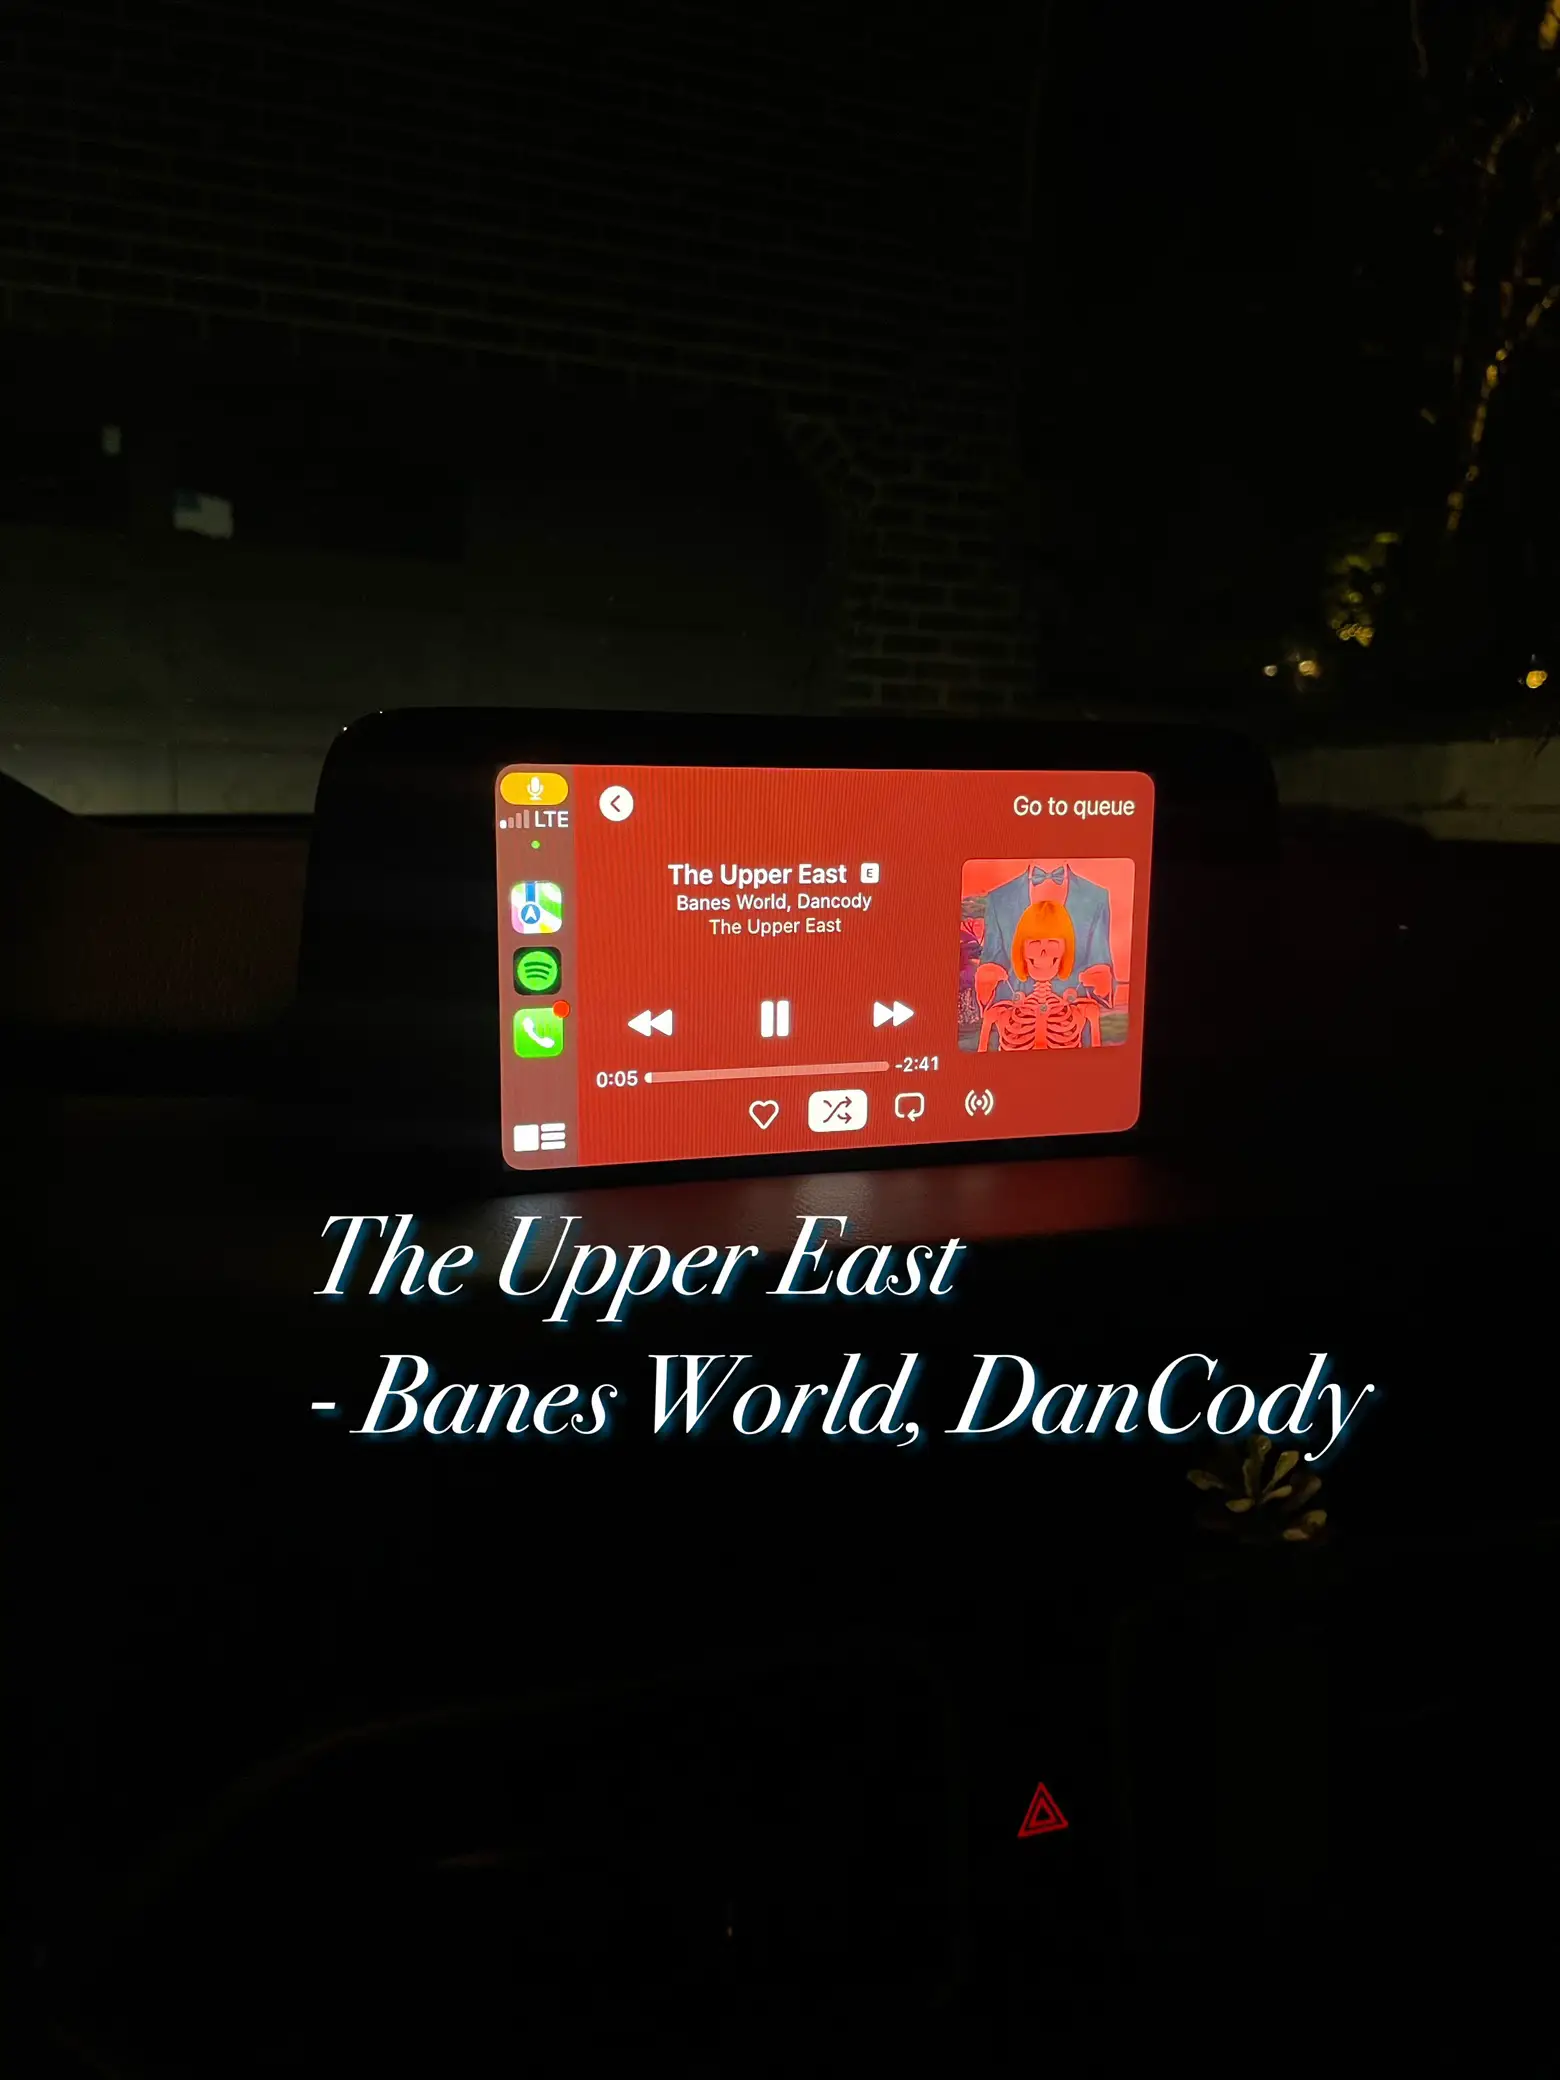  A car's dashboard with a playlist of music on it.